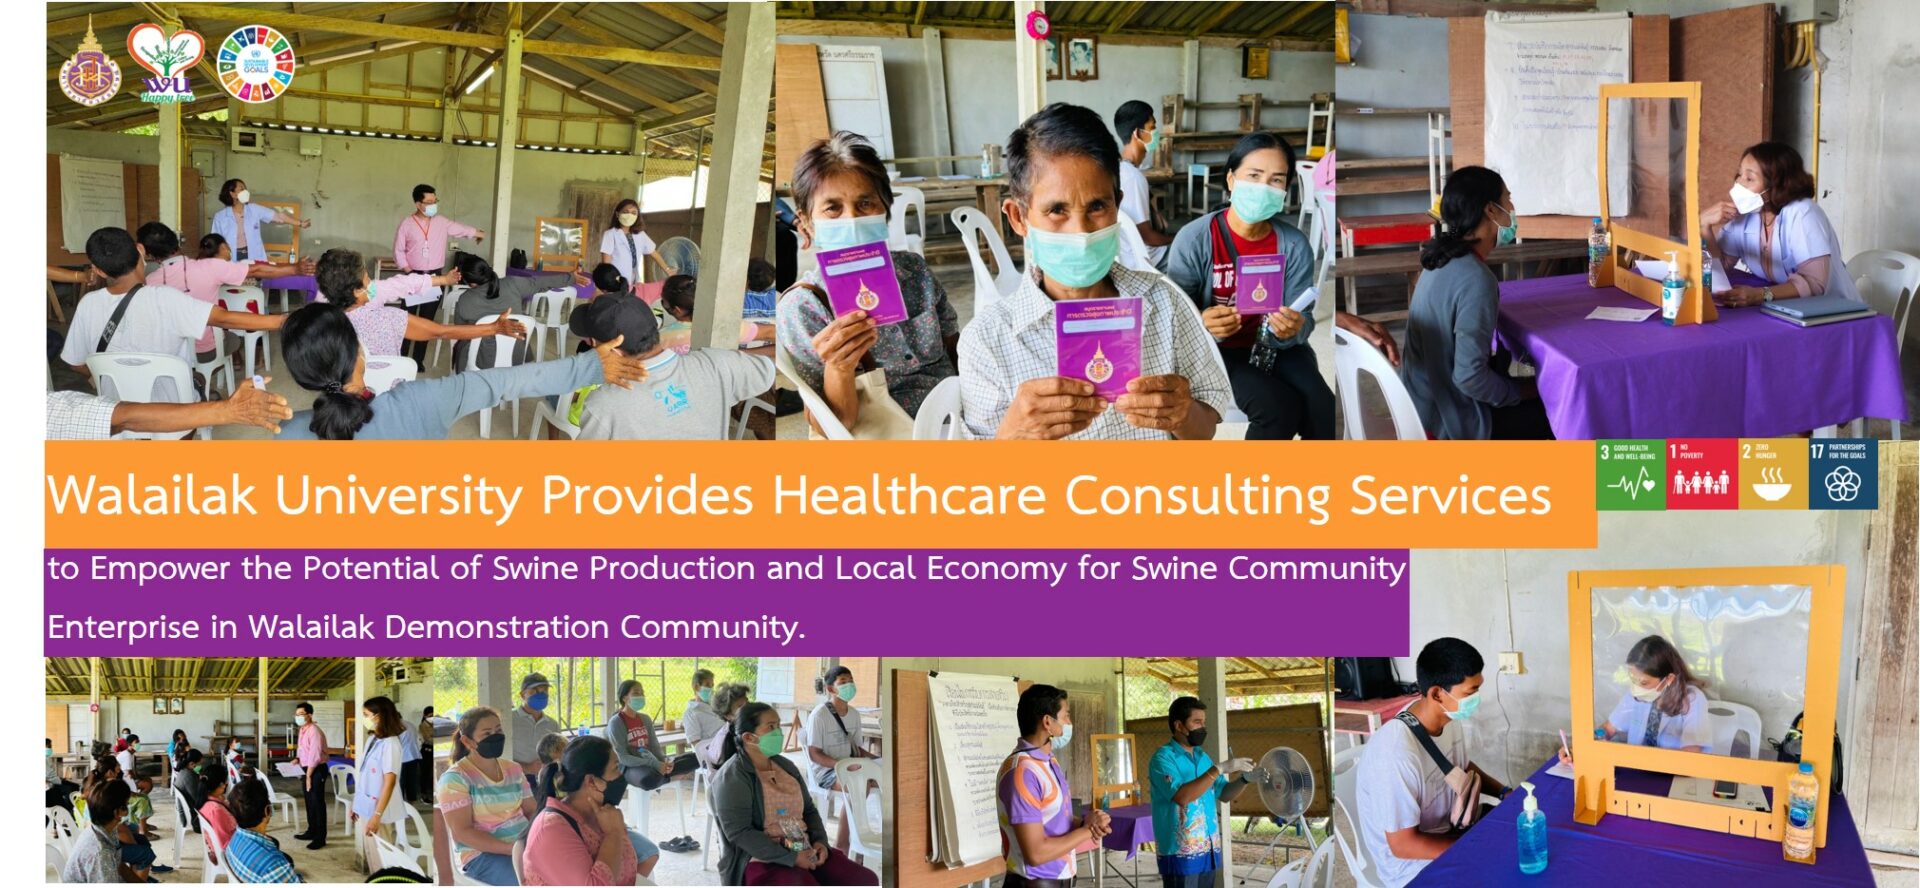 Walailak University Provides Healthcare Consulting Services to Empower the Potential of Swine Production and Local Economy for Swine Community Enterprise in Walailak Demonstration Community